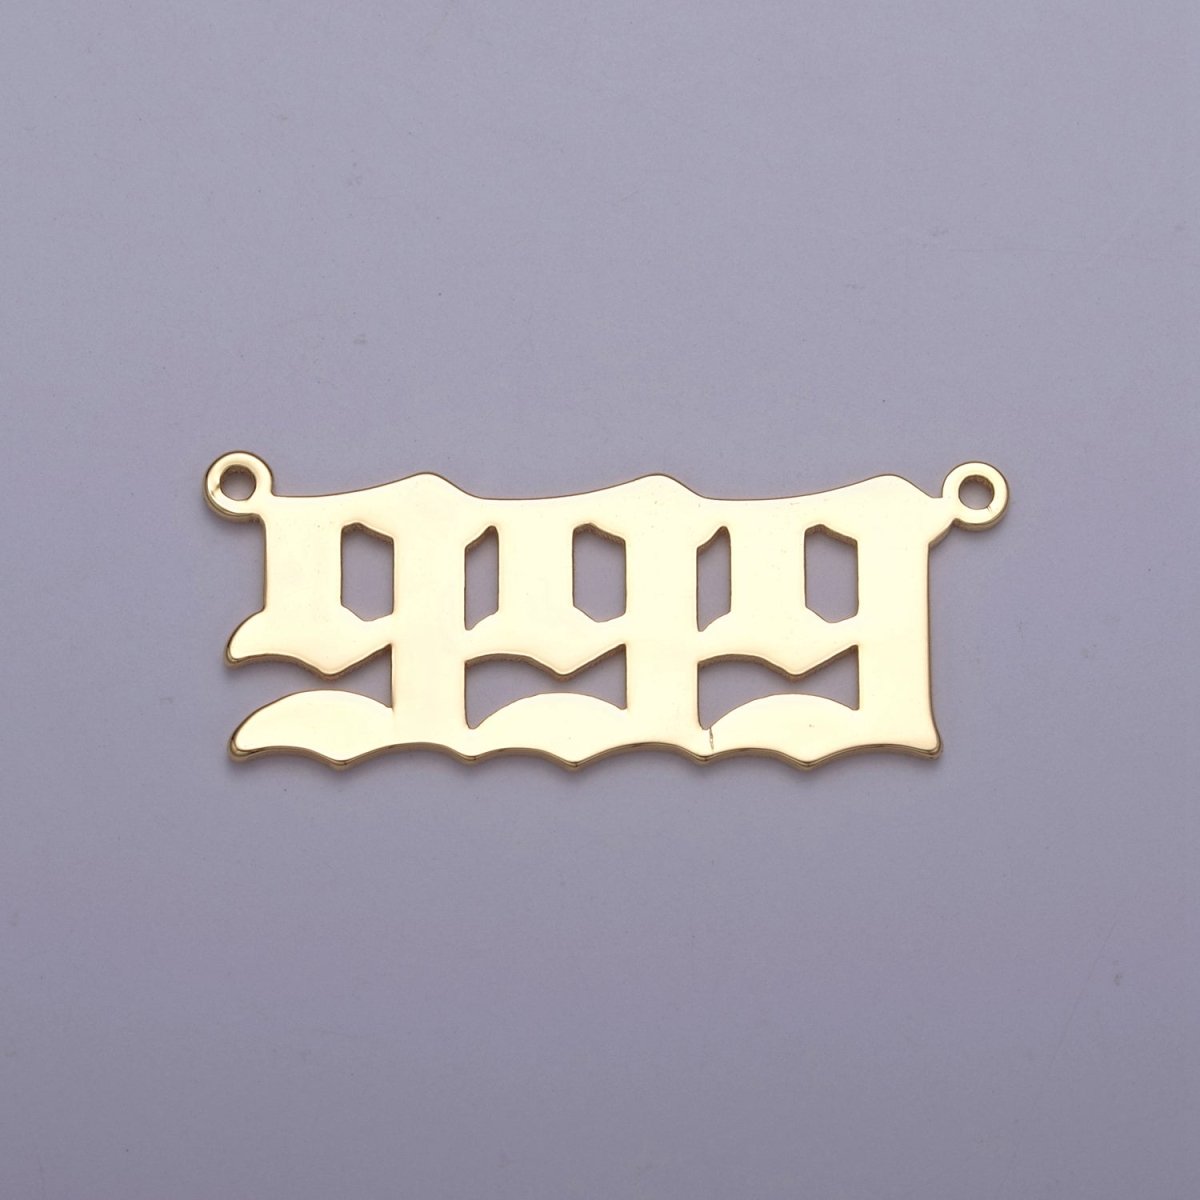 Gold Filled Angel Number Charm Connector Lucky Number for Necklace Bracelet Component F-231 F-261 F-268 F-272 F-277 F-279 F-281 F-283 F-310 - DLUXCA